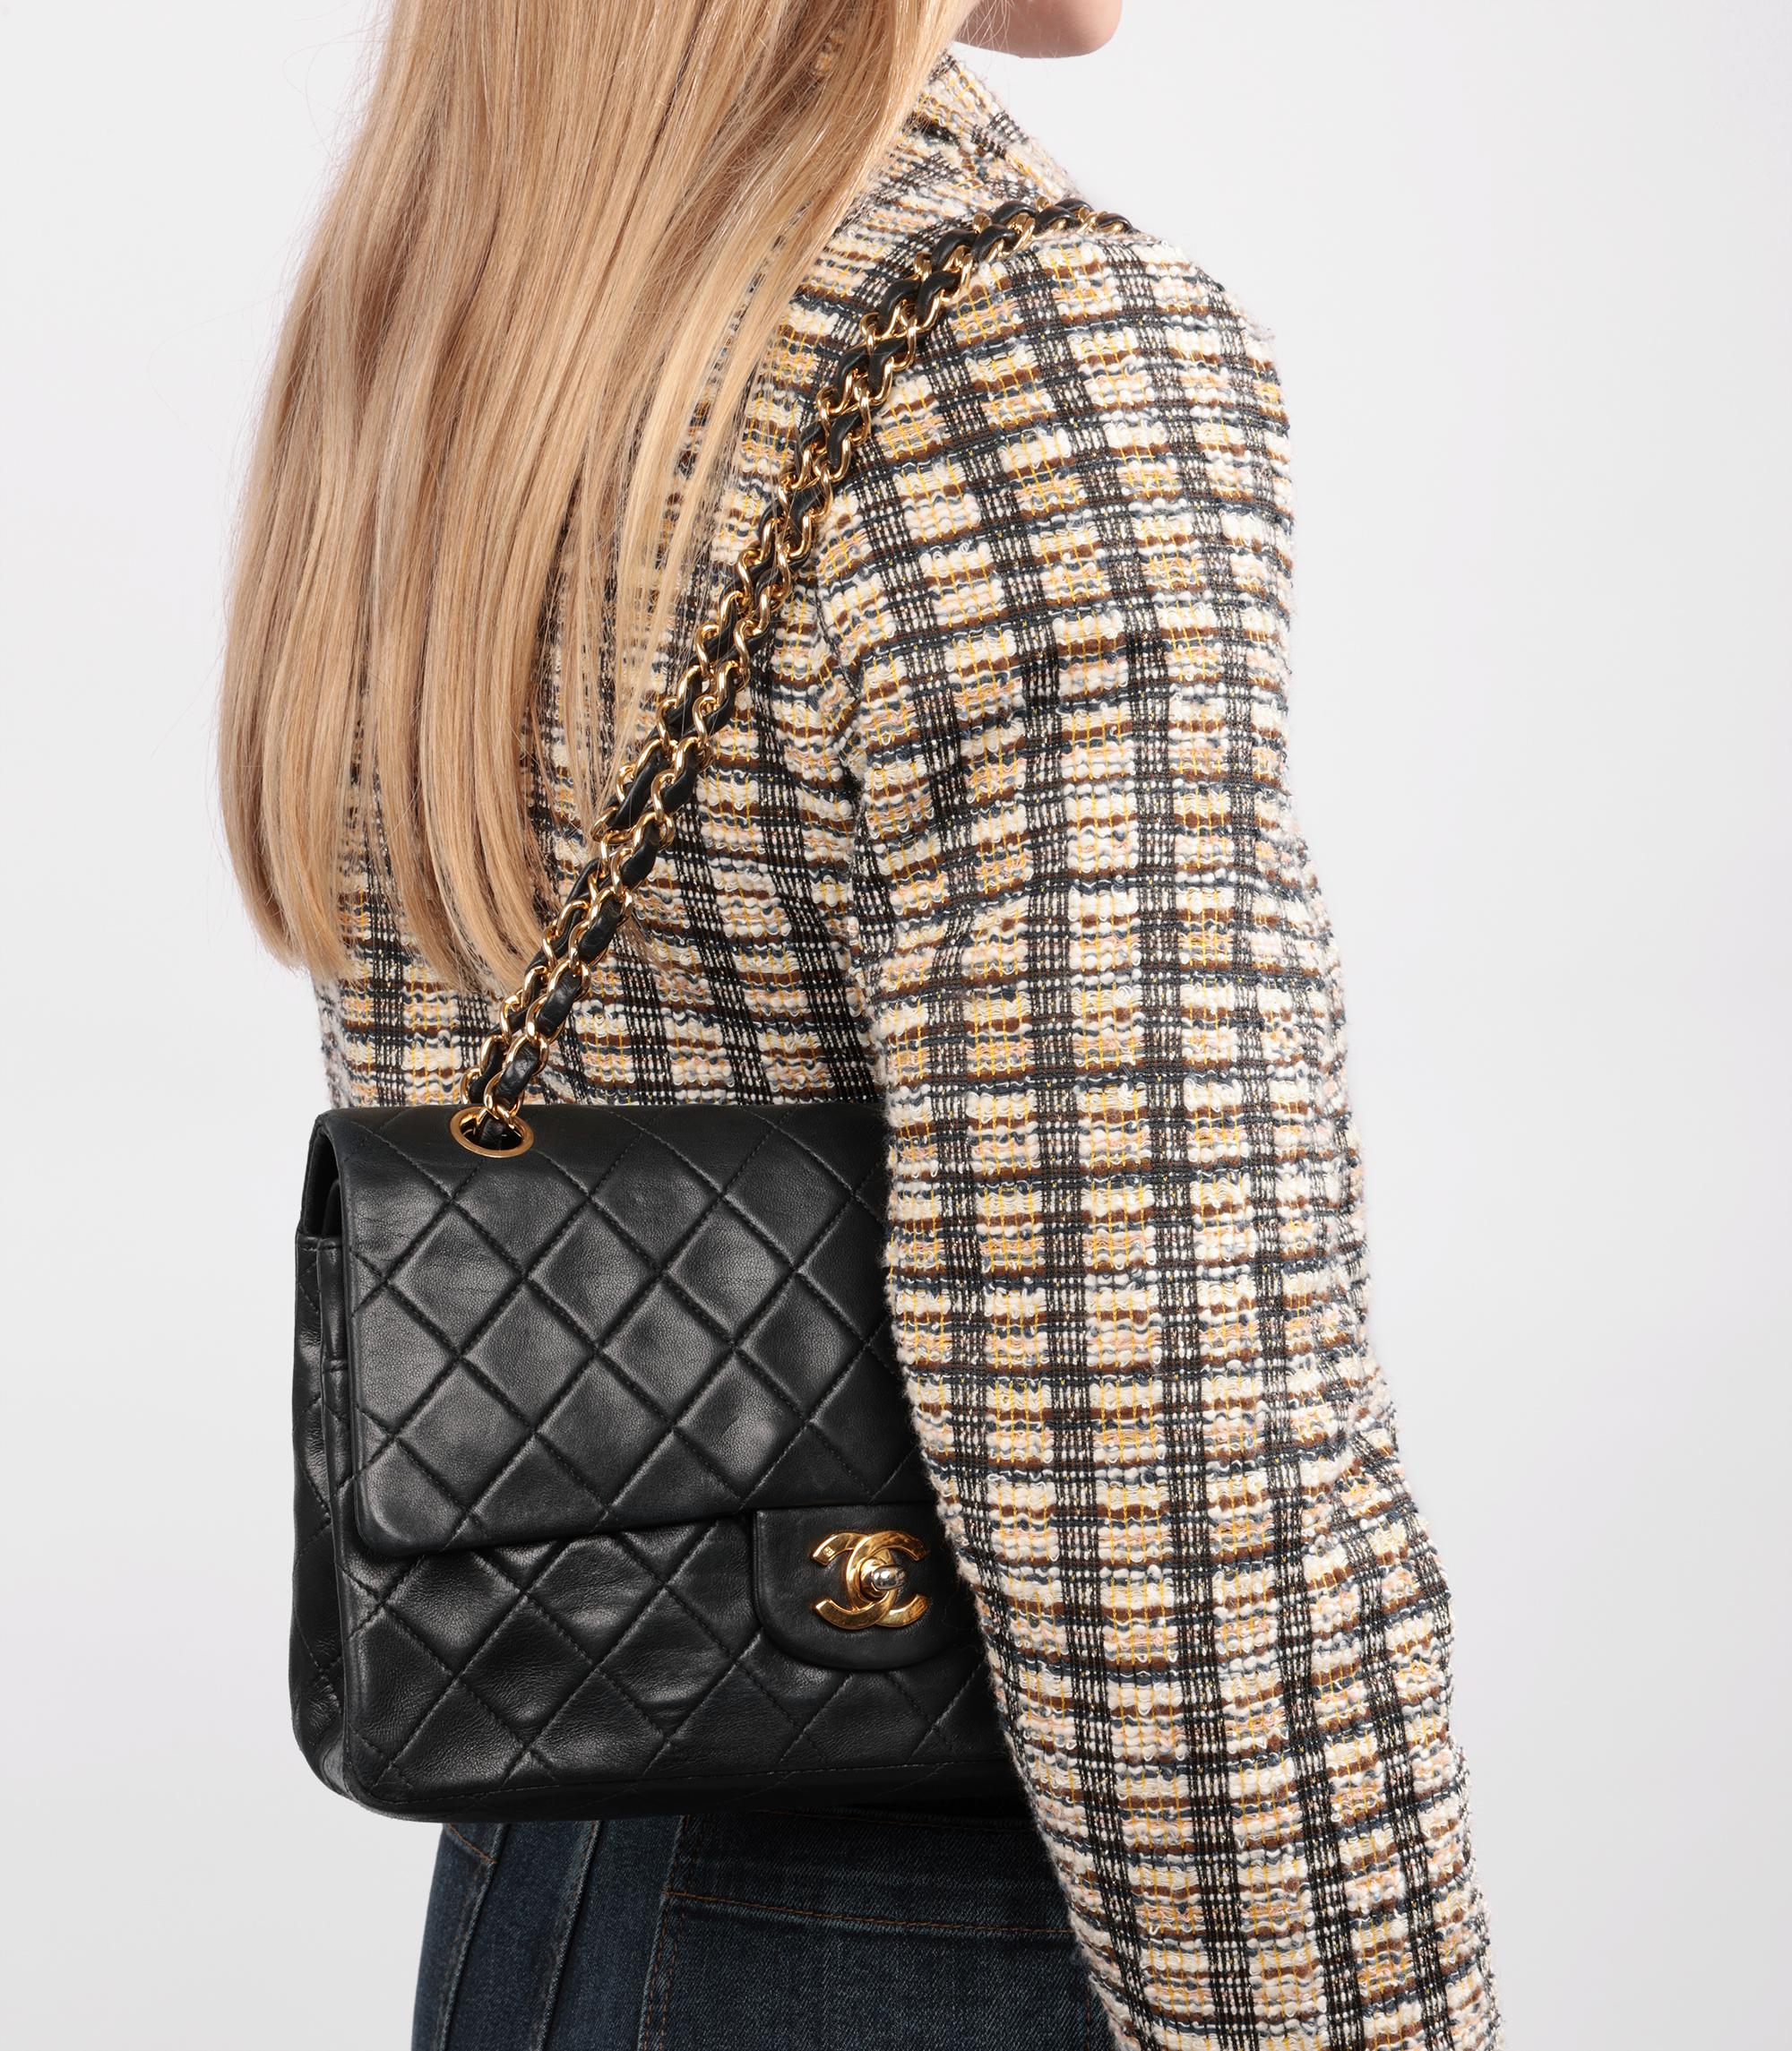 Chanel Black Quilted Lambskin Vintage Medium Classic Double Flap Bag

Brand- Chanel
Model- Medium Classic Double Flap Bag
Product Type- Shoulder
Serial Number- 2009691
Age- Circa 1991
Accompanied By- Chanel Dust Bag, Box
Colour- Black
Hardware- Gold